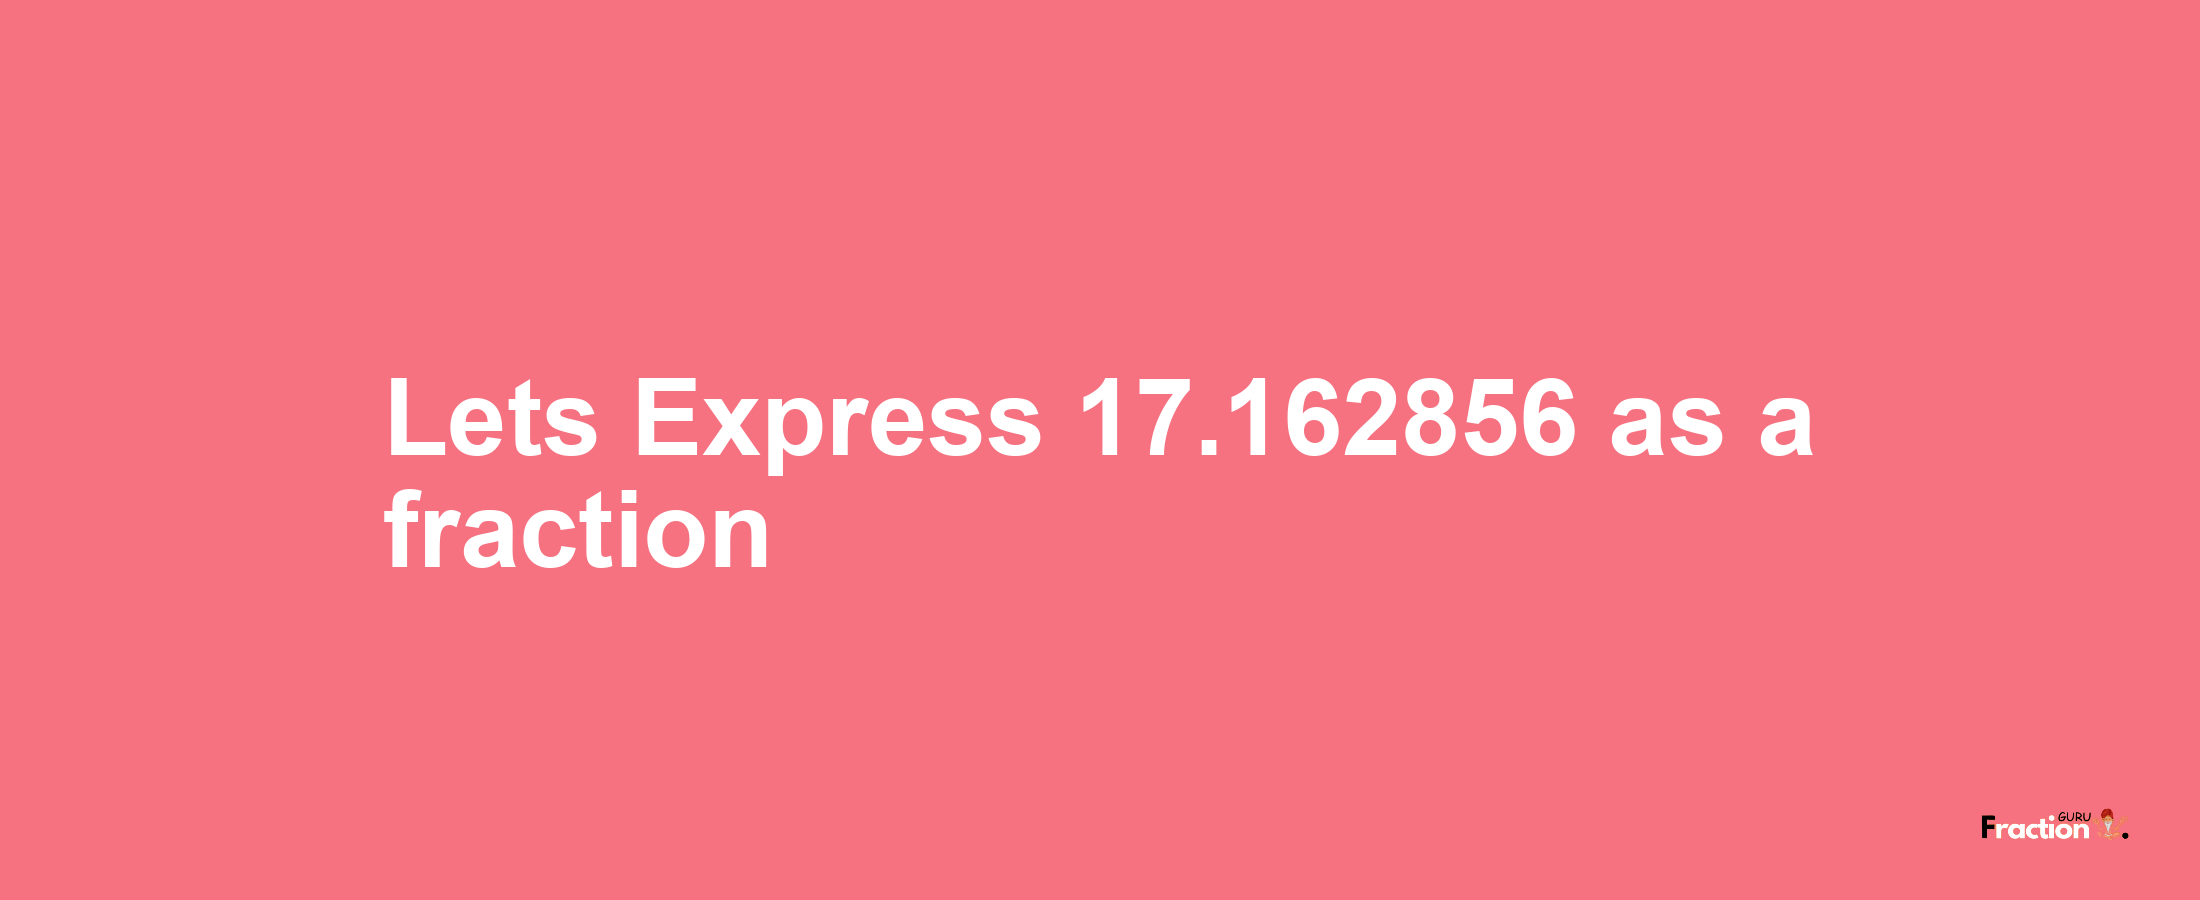 Lets Express 17.162856 as afraction